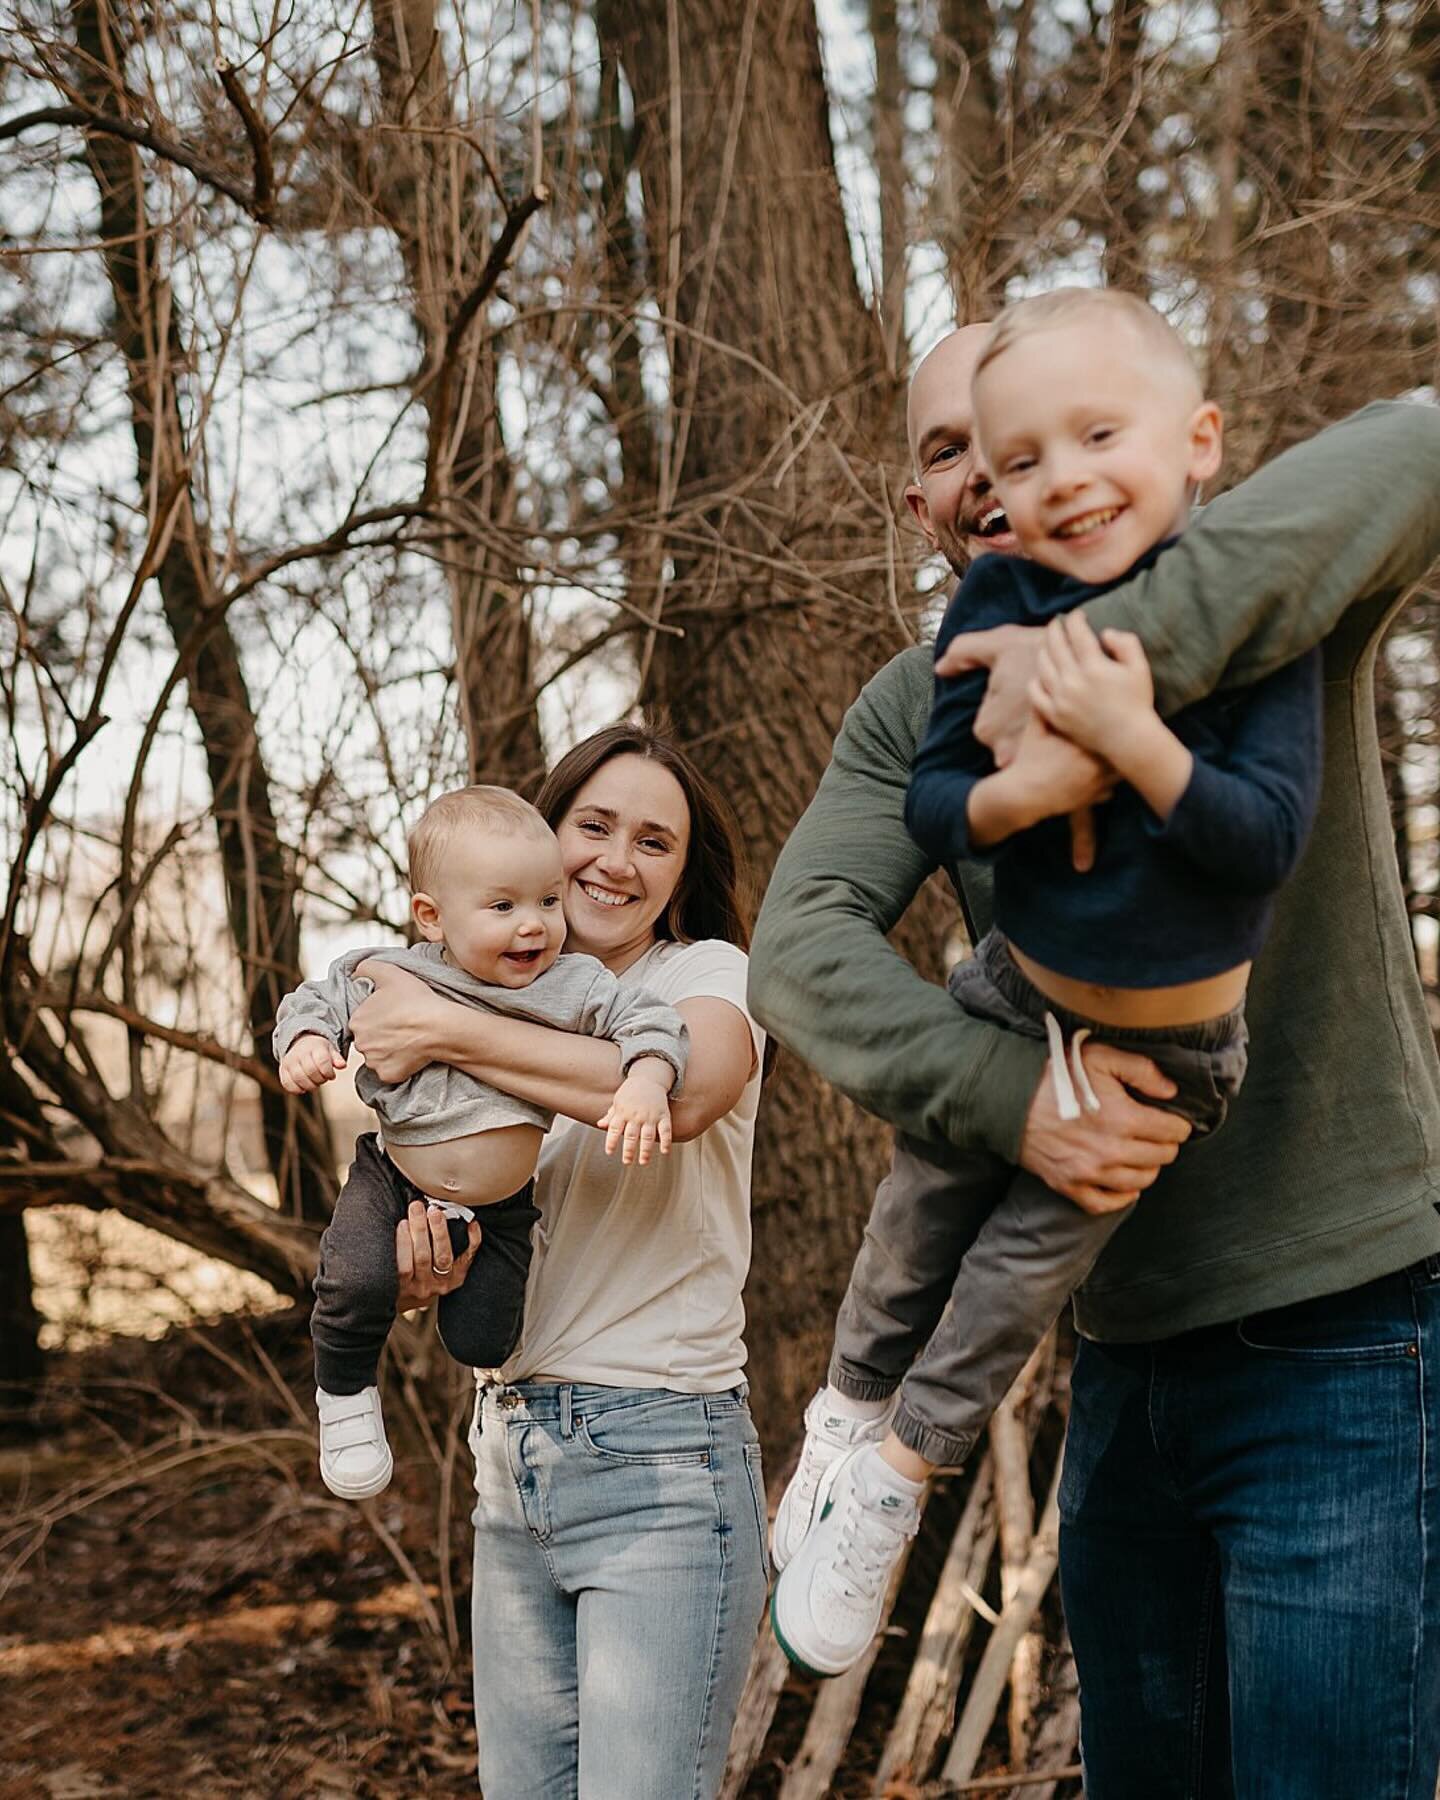 Play, dance, draw, fly, laugh &hellip; just a few things we can do during your session with your favorite people &hellip; 💛

And this sweet lil&rsquo; family &hellip; 🥹 It sure has been pure joy getting to know them over the years and watching thei